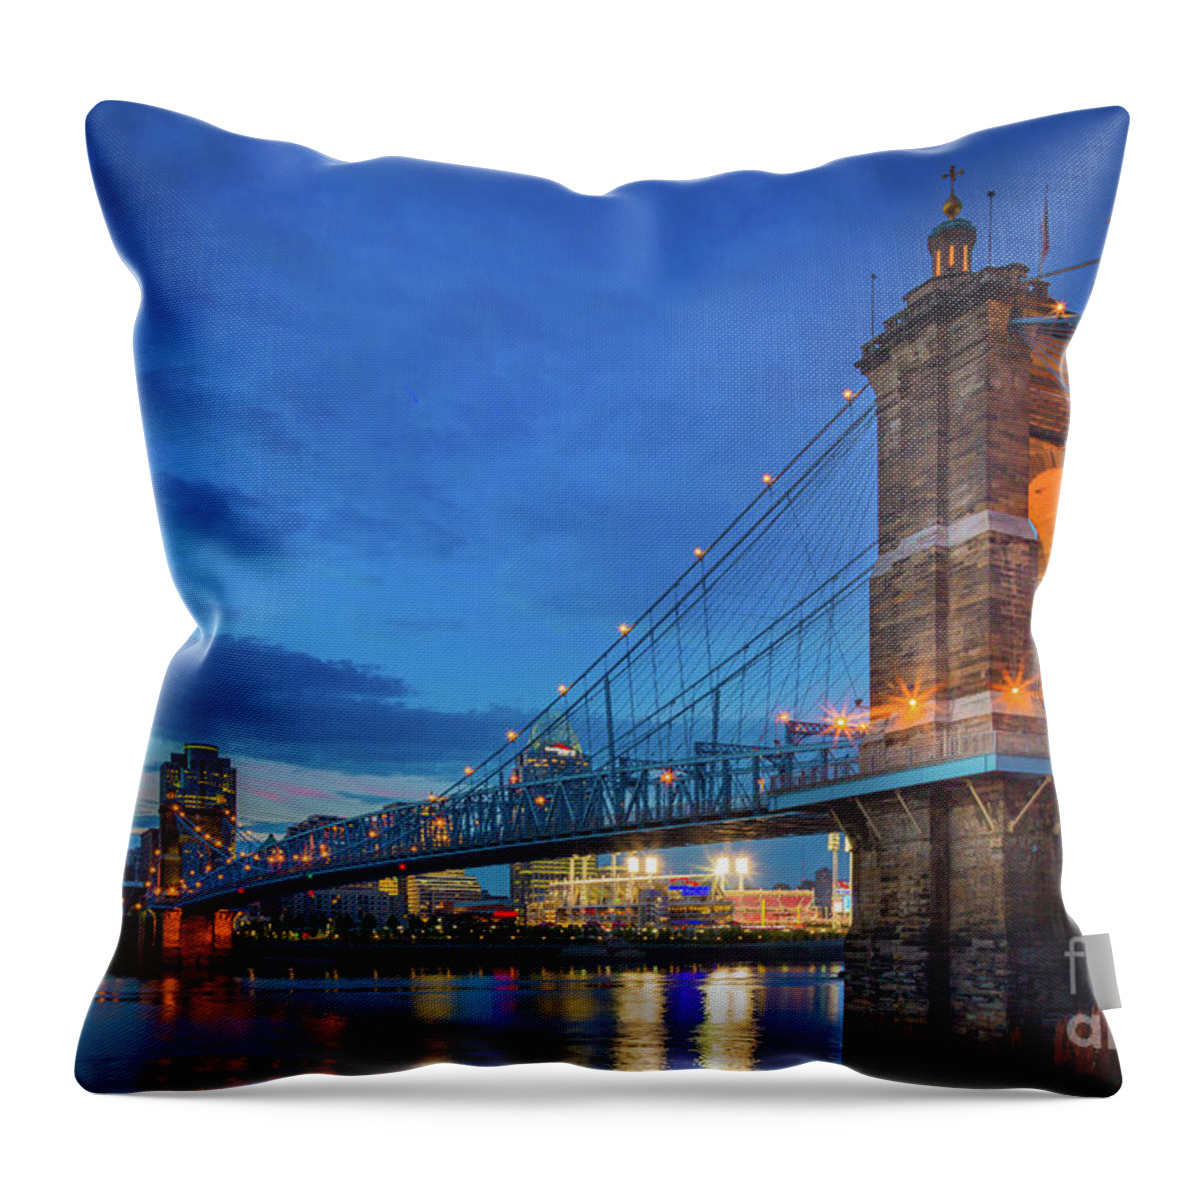 America Throw Pillow featuring the photograph Ohio River by Inge Johnsson